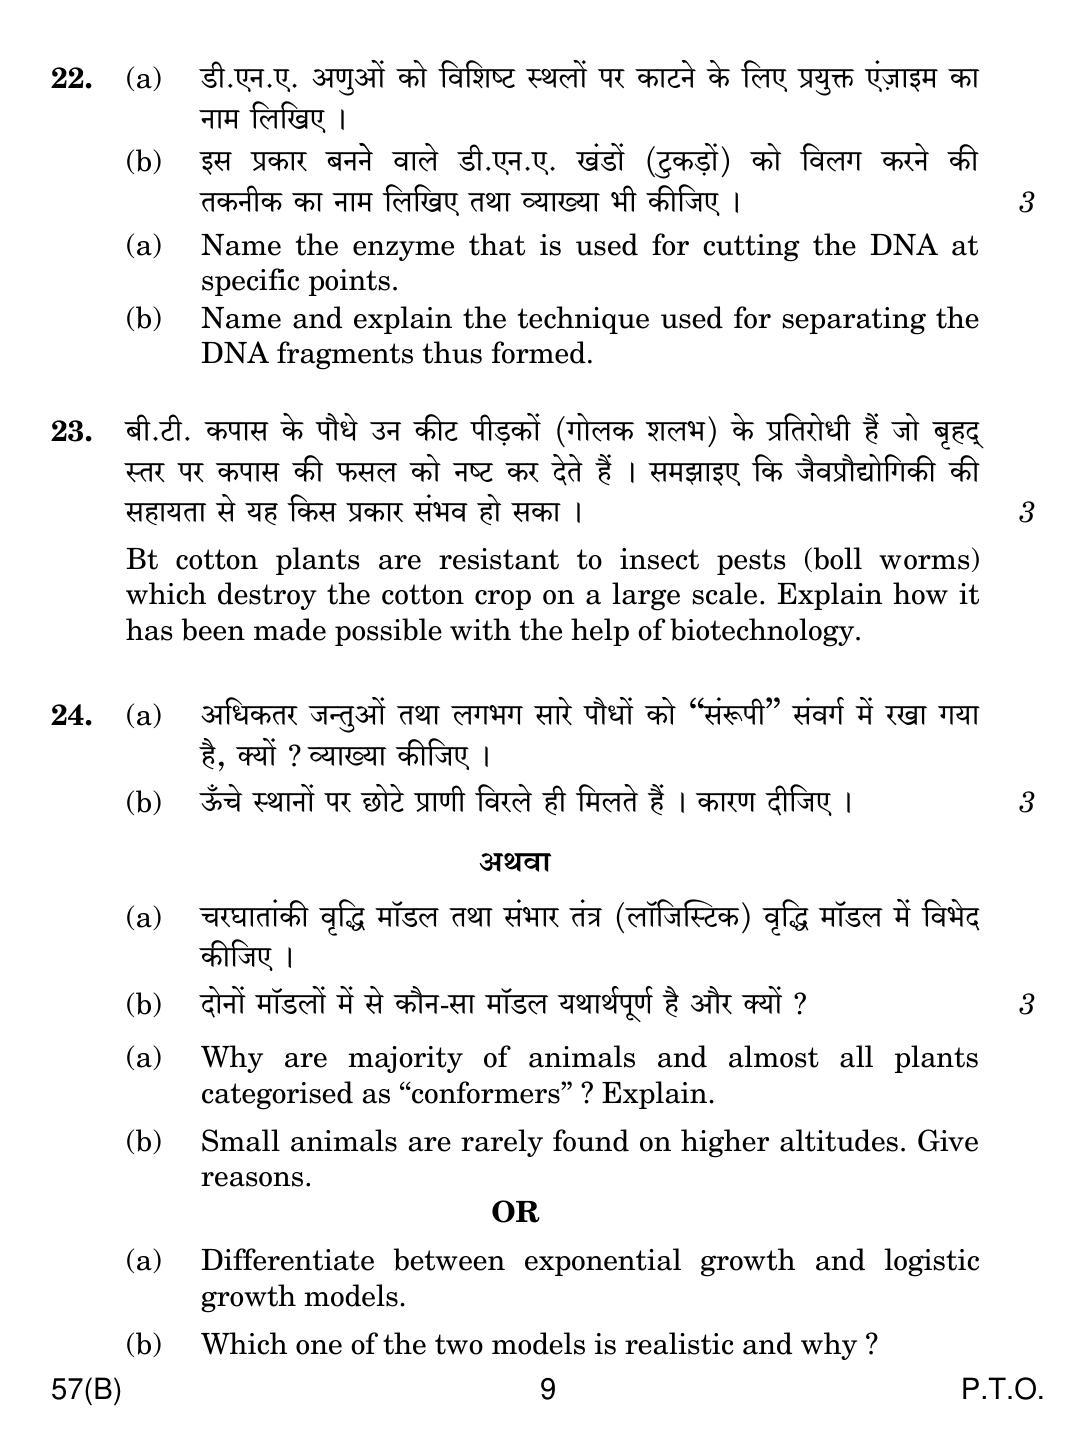 CBSE Class 12 57(B) BIOLOGY 2019 Compartment Question Paper - Page 9